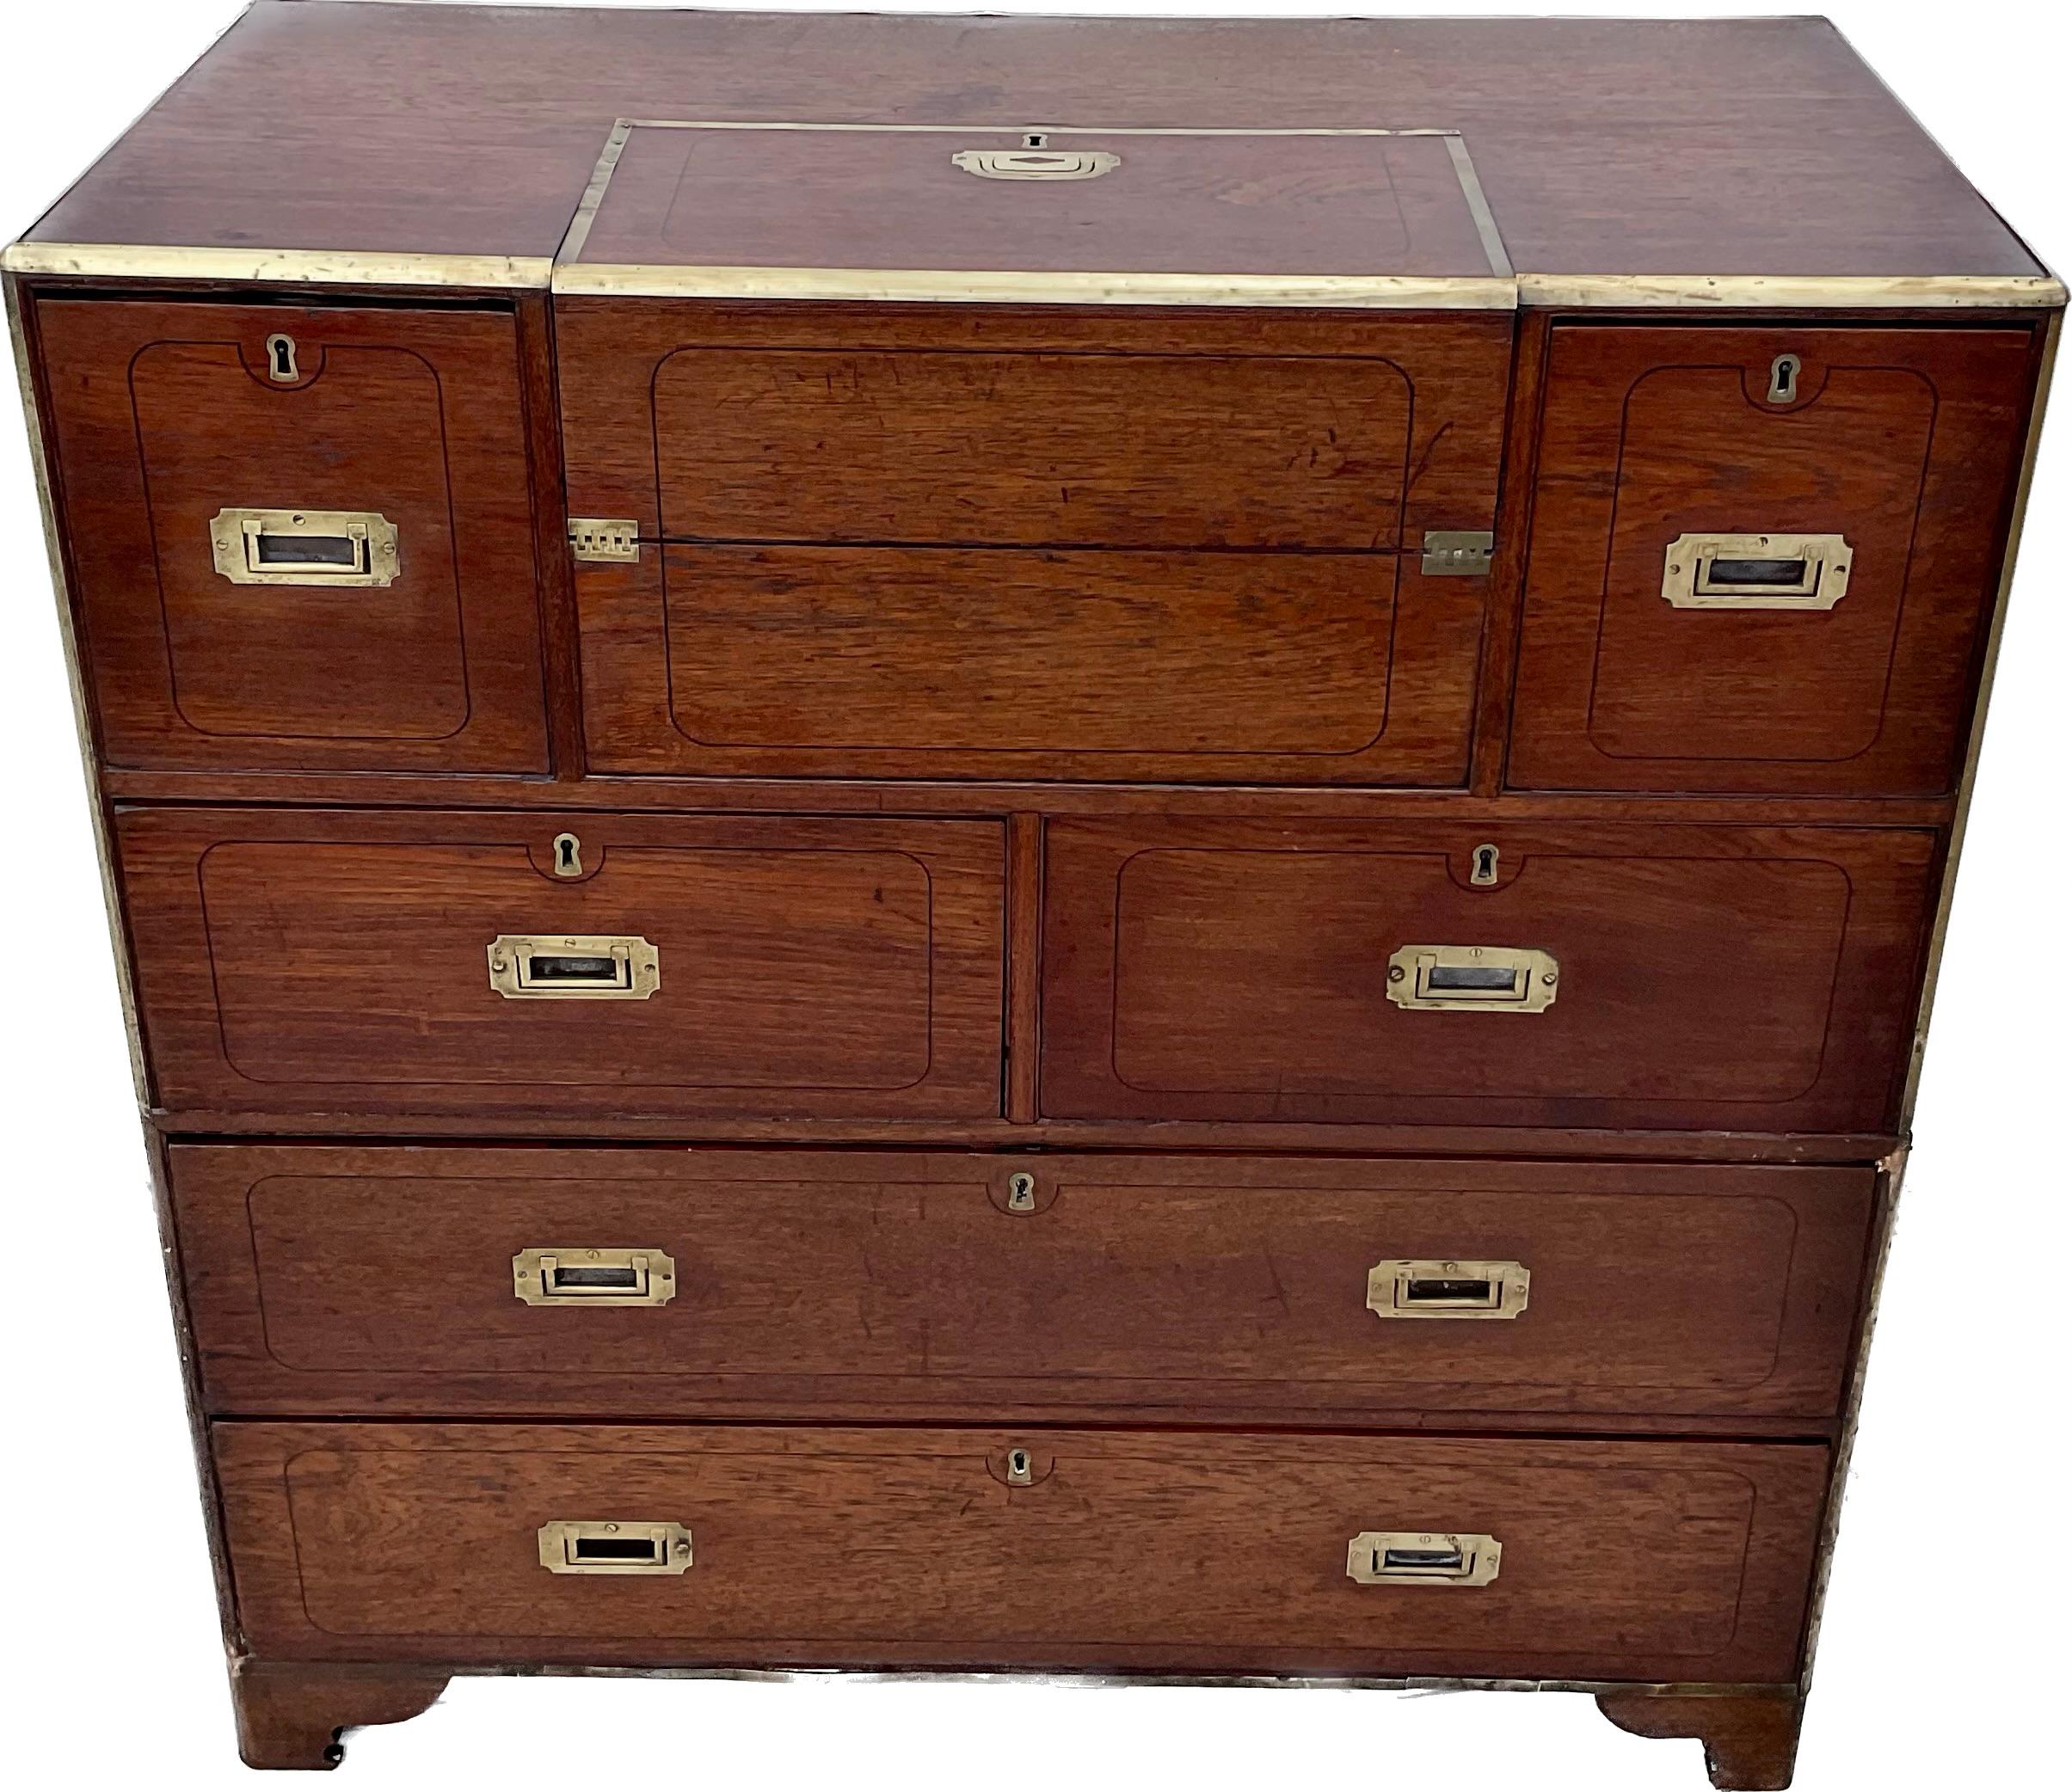 English Campaign Chest With Integrated Writing Desk In Good Condition For Sale In Bradenton, FL